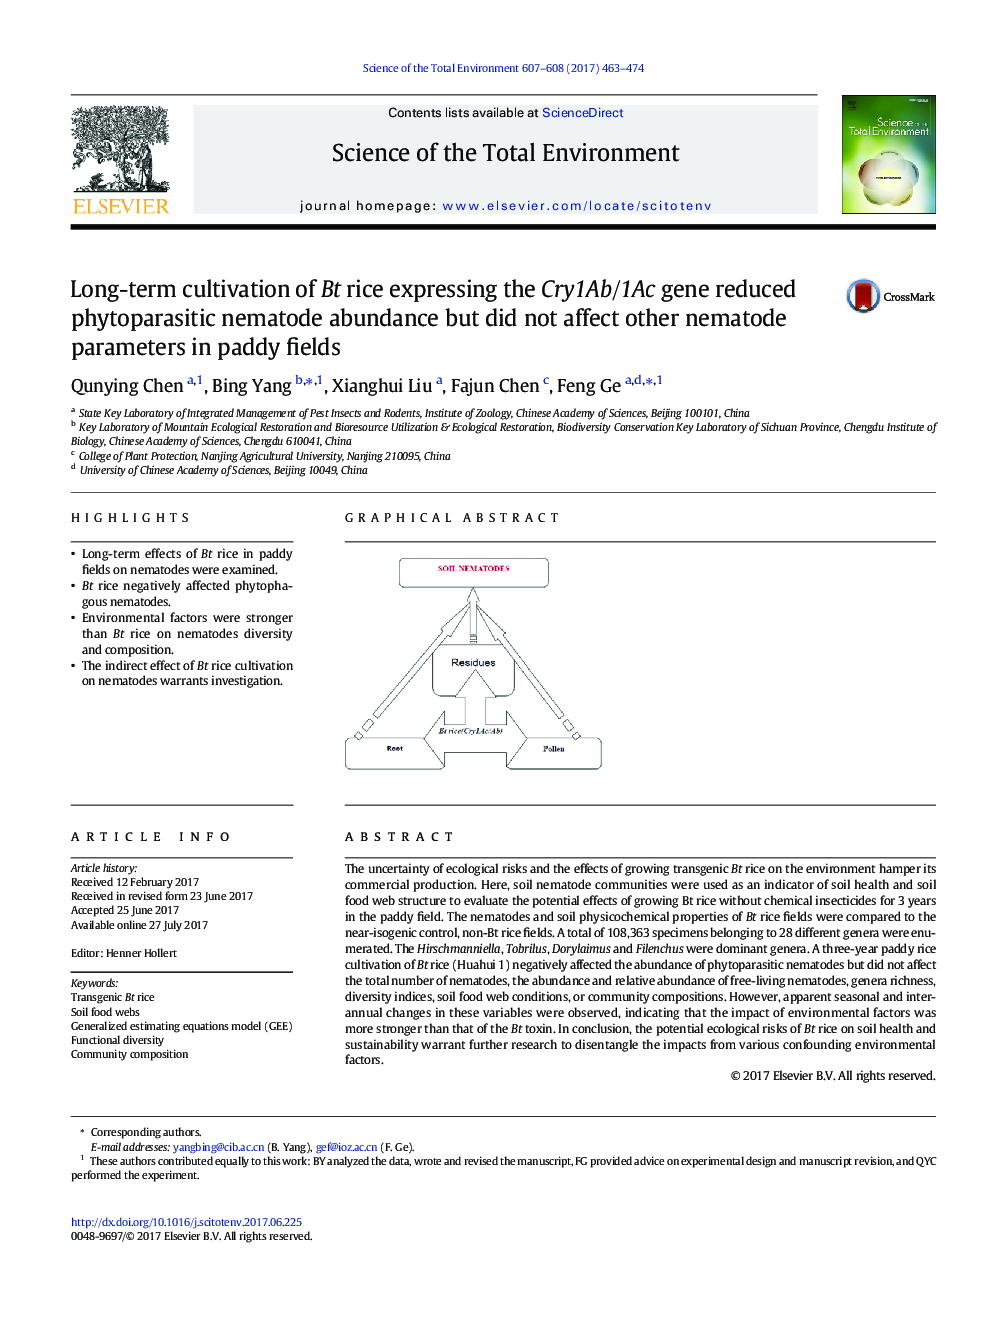 Long-term cultivation of Bt rice expressing the Cry1Ab/1Ac gene reduced phytoparasitic nematode abundance but did not affect other nematode parameters in paddy fields